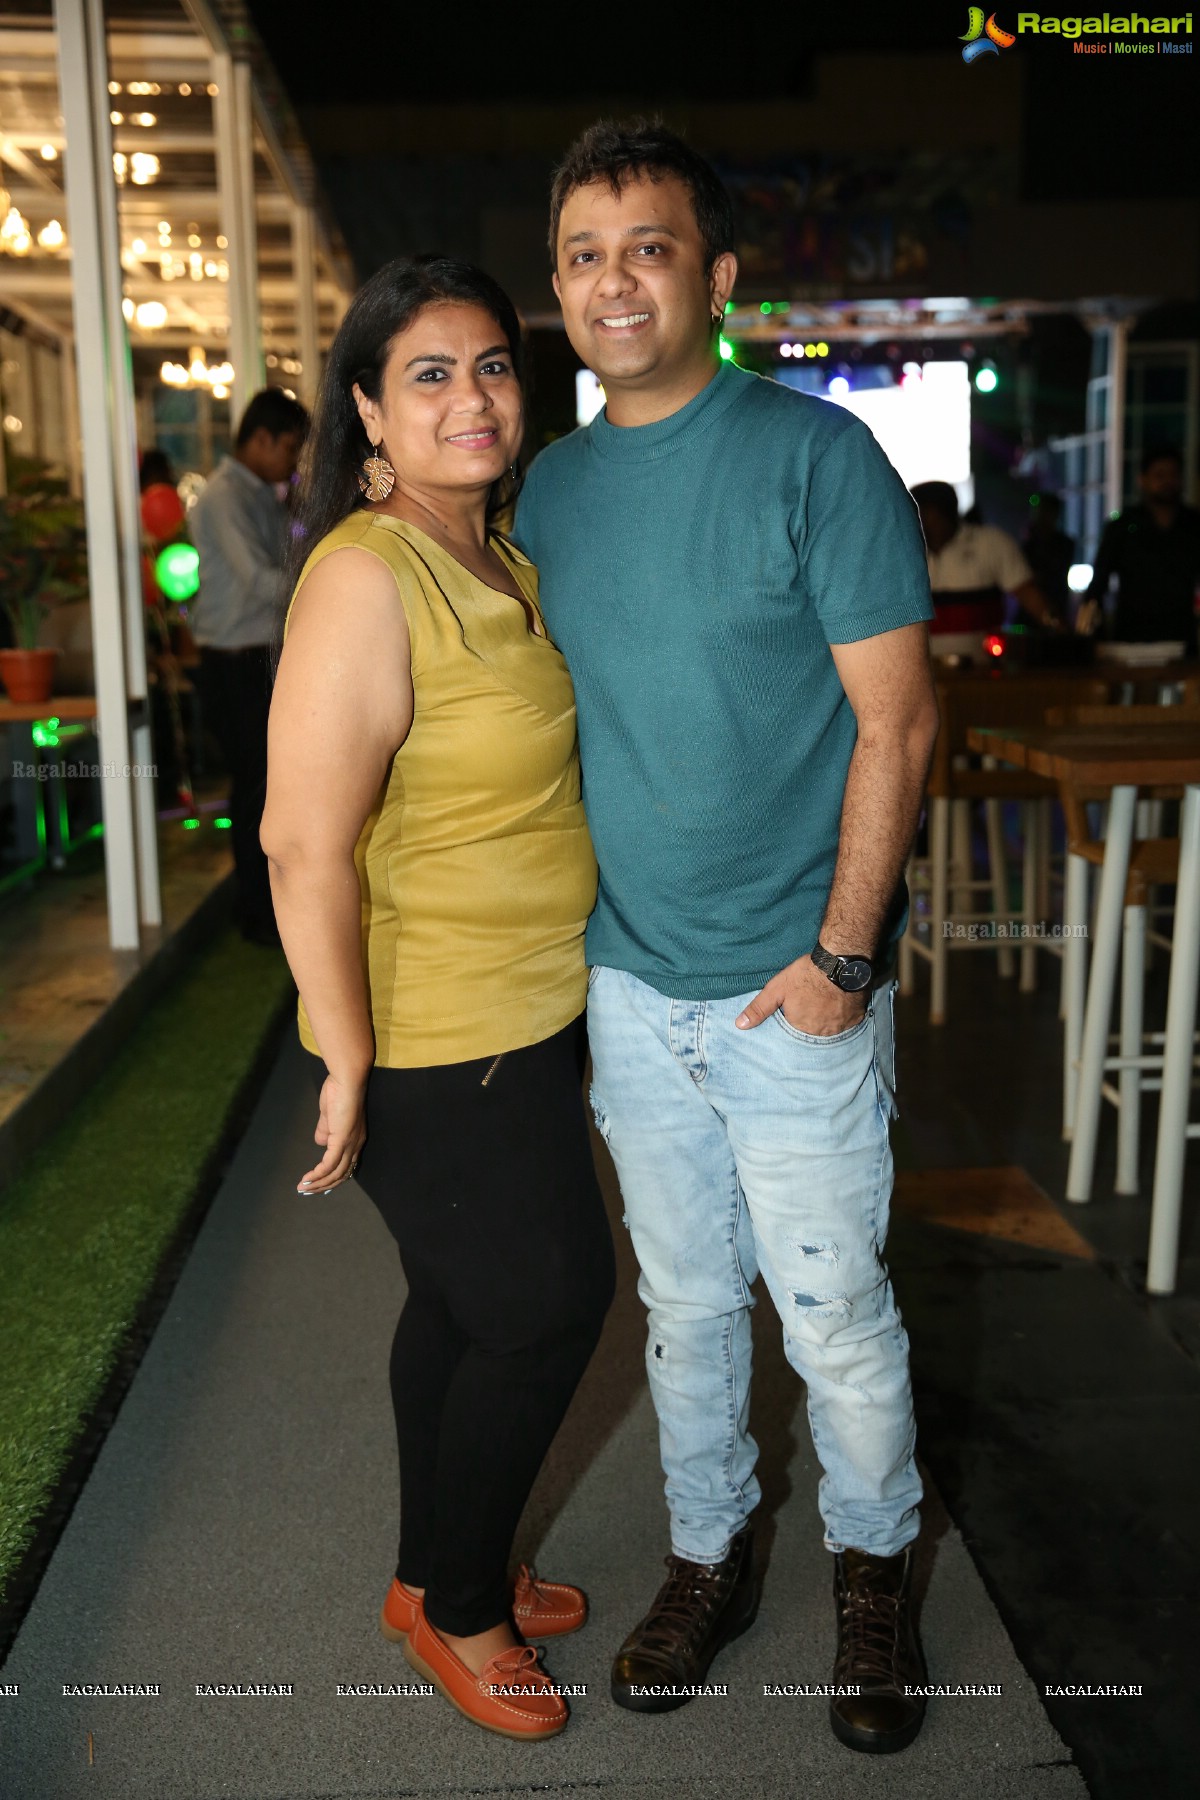 Amnesia Sky Bar & Fusion 9 Launch Party at Inorbit Mall